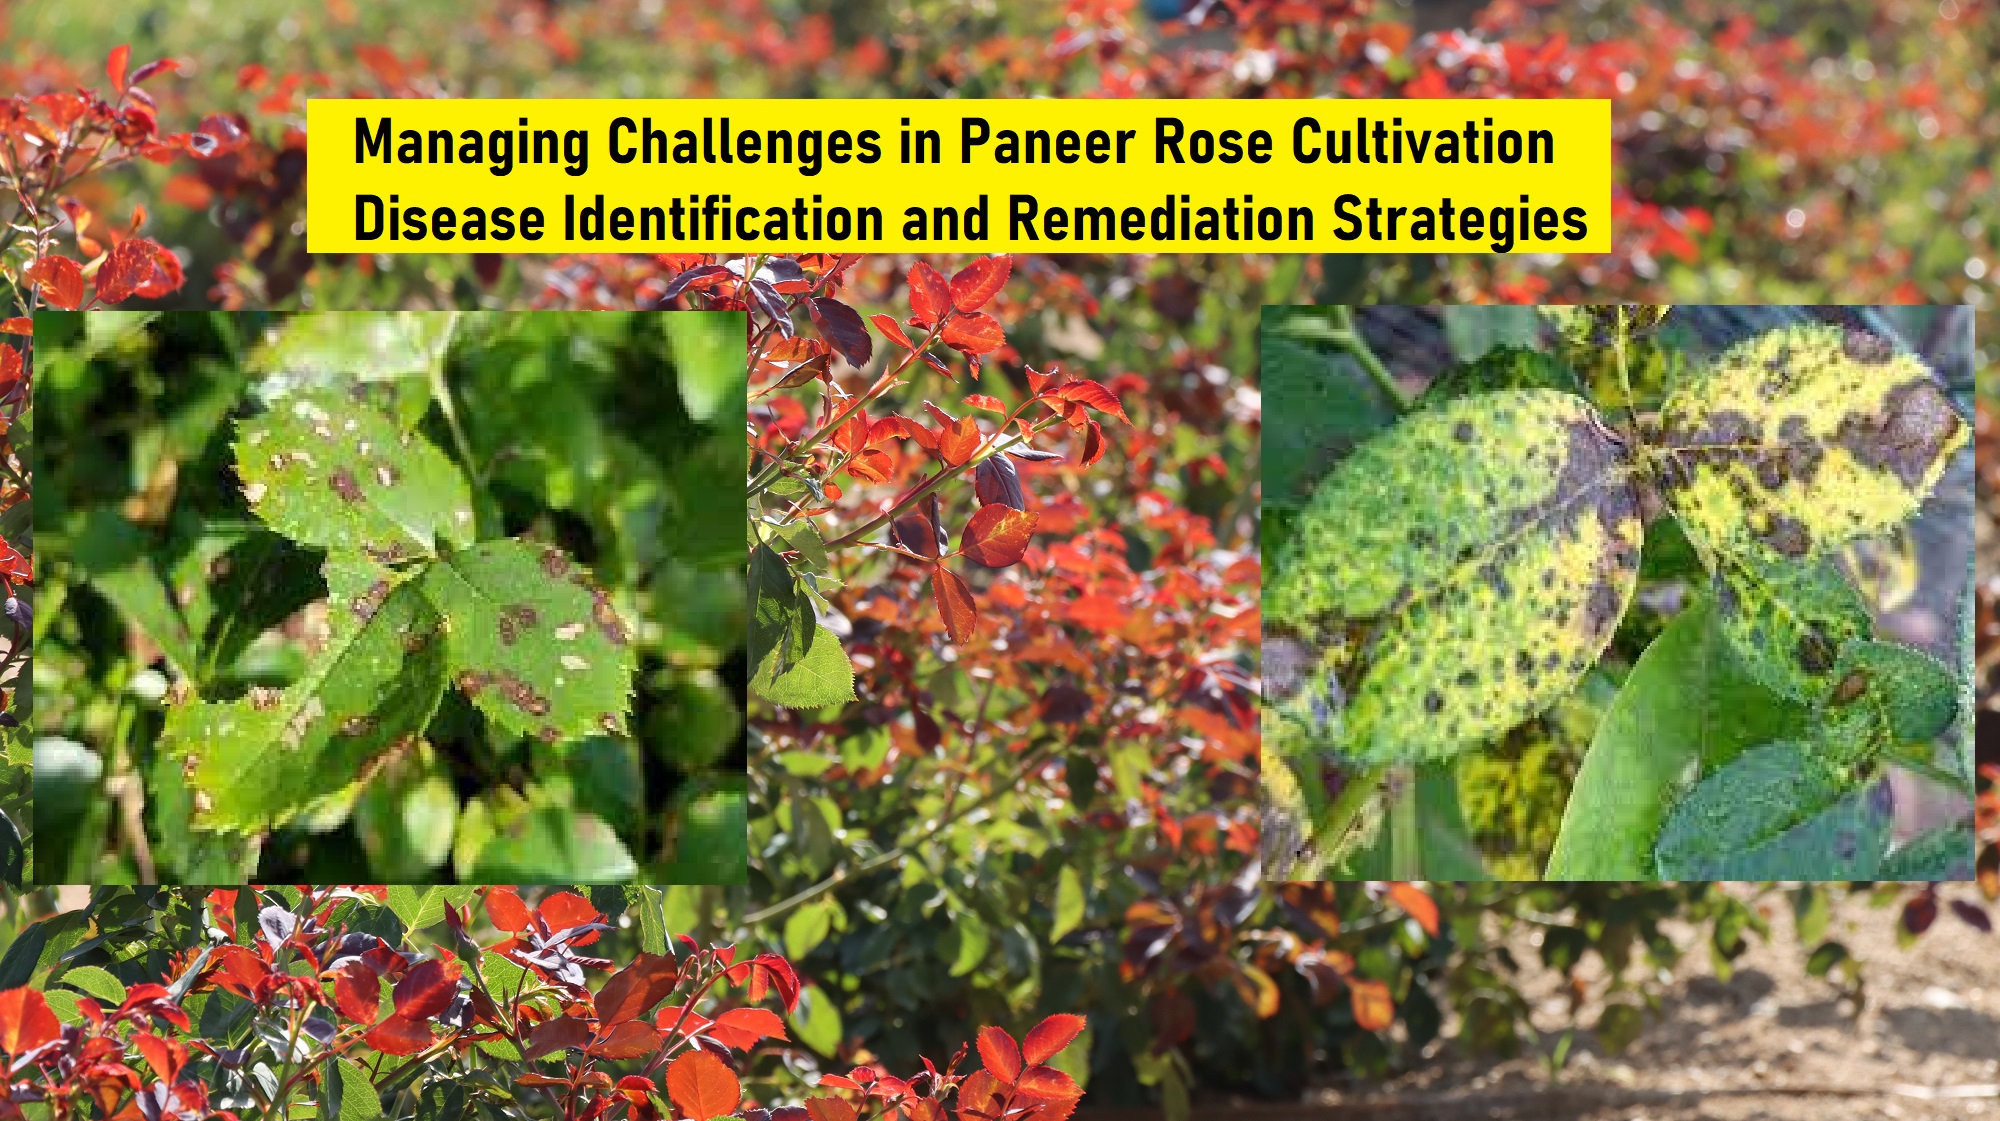 20 Multiple-Choice Questions (MCQs) related to Diseases Affecting Paneer Rose crops along with their corresponding answers with an explanation